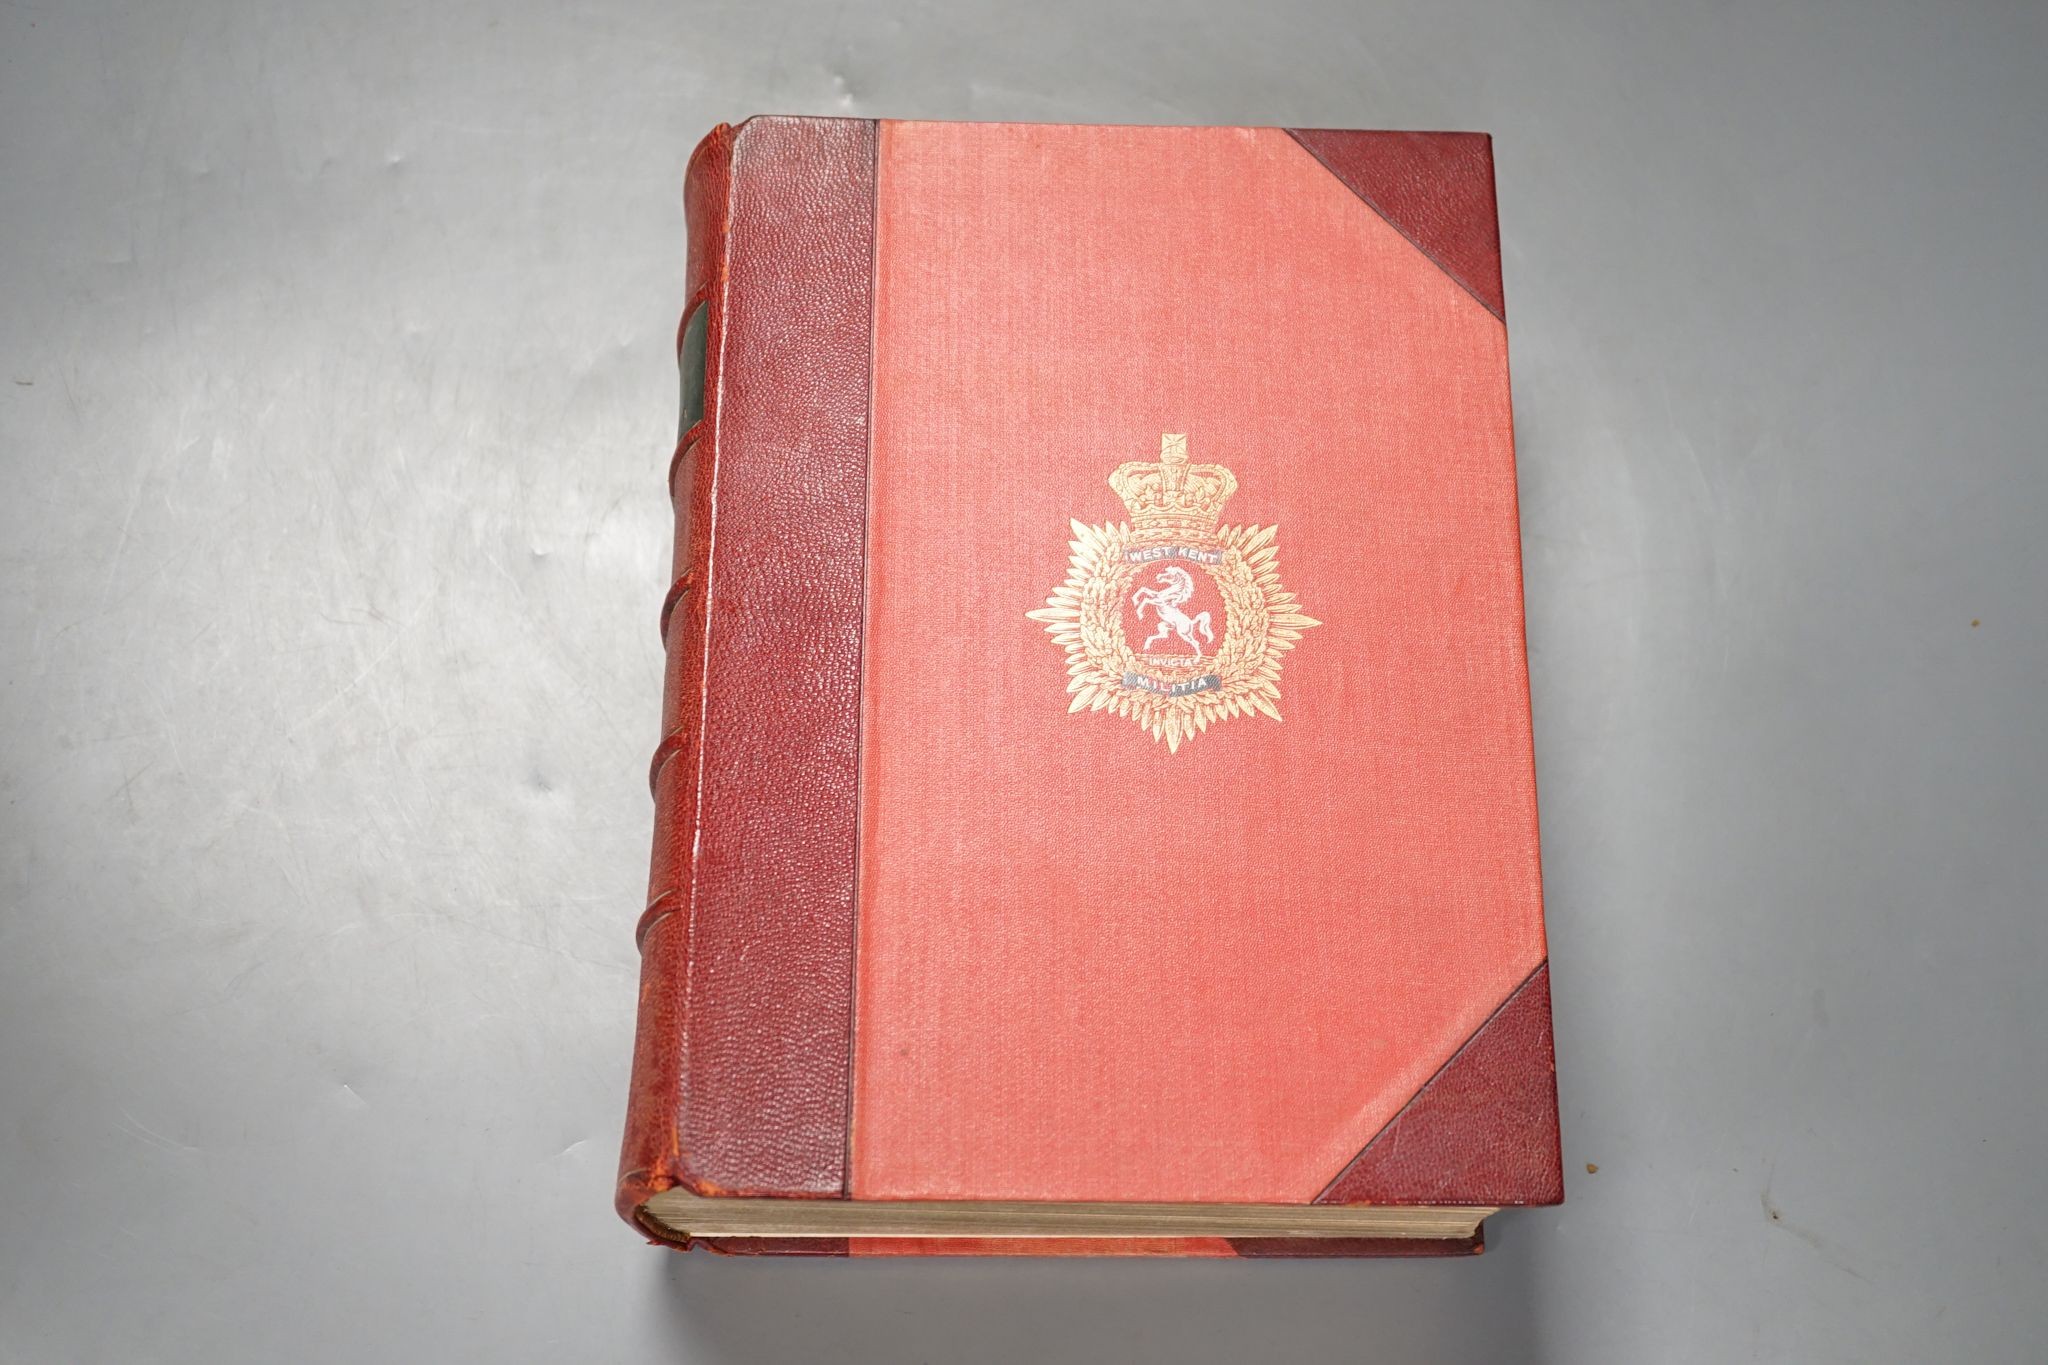 Bonhole - Col. J. - Historical Records of the West Kent Militia, London 1909 and Hamilton, Lieut-Gen. Sir F.W. - The Origin and History of the First or Grenadier Guards, 3 vols, 4to